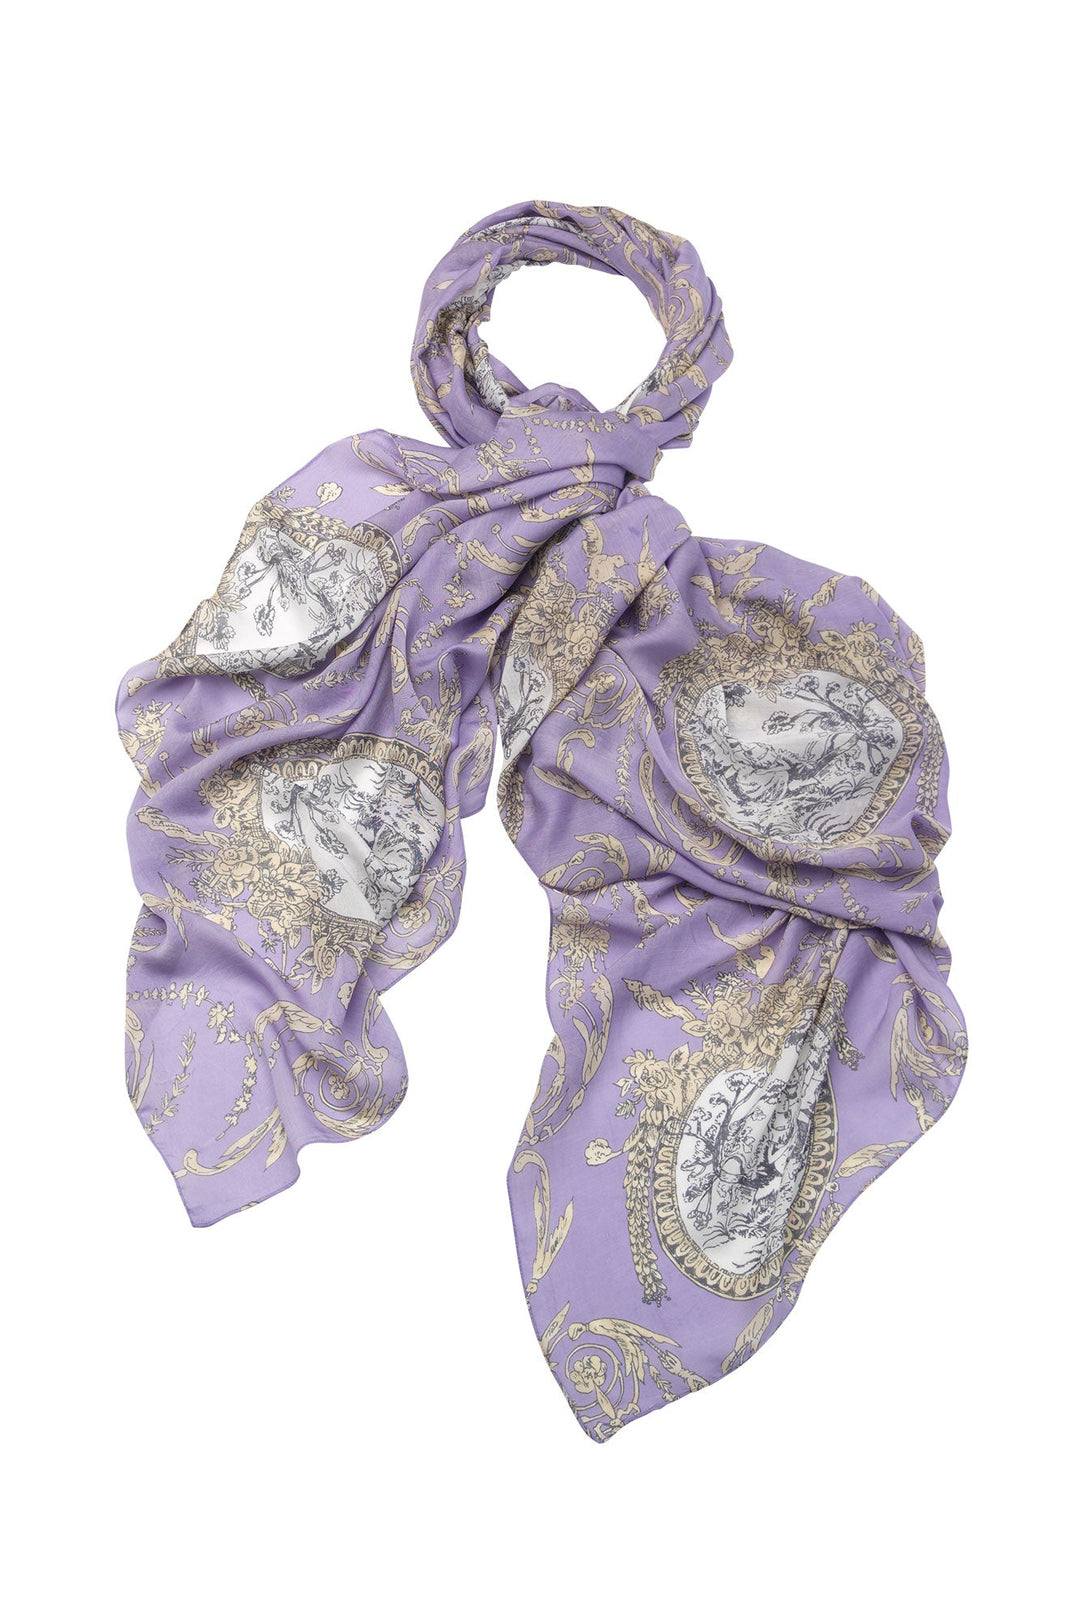 Women's accessories, gifts for her. Large scarf  in lilac purple with valentine floral print by One Hundred Stars